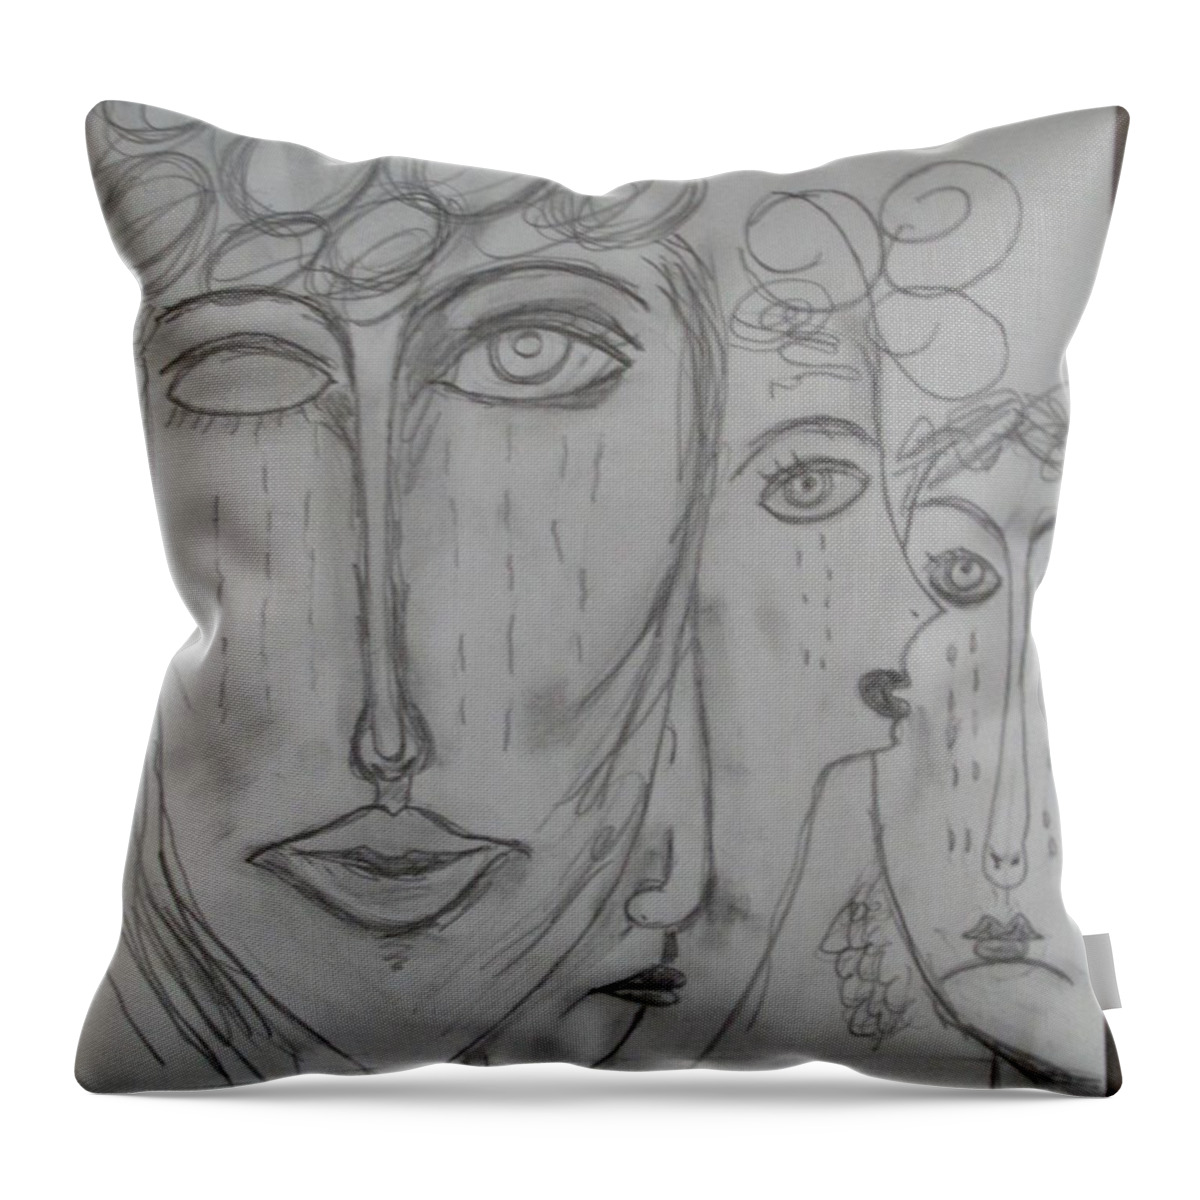 Abstract Children Hunger War Compassion Caring Drawing Black White Throw Pillow featuring the drawing There Are Hungry Children by Sharyn Winters